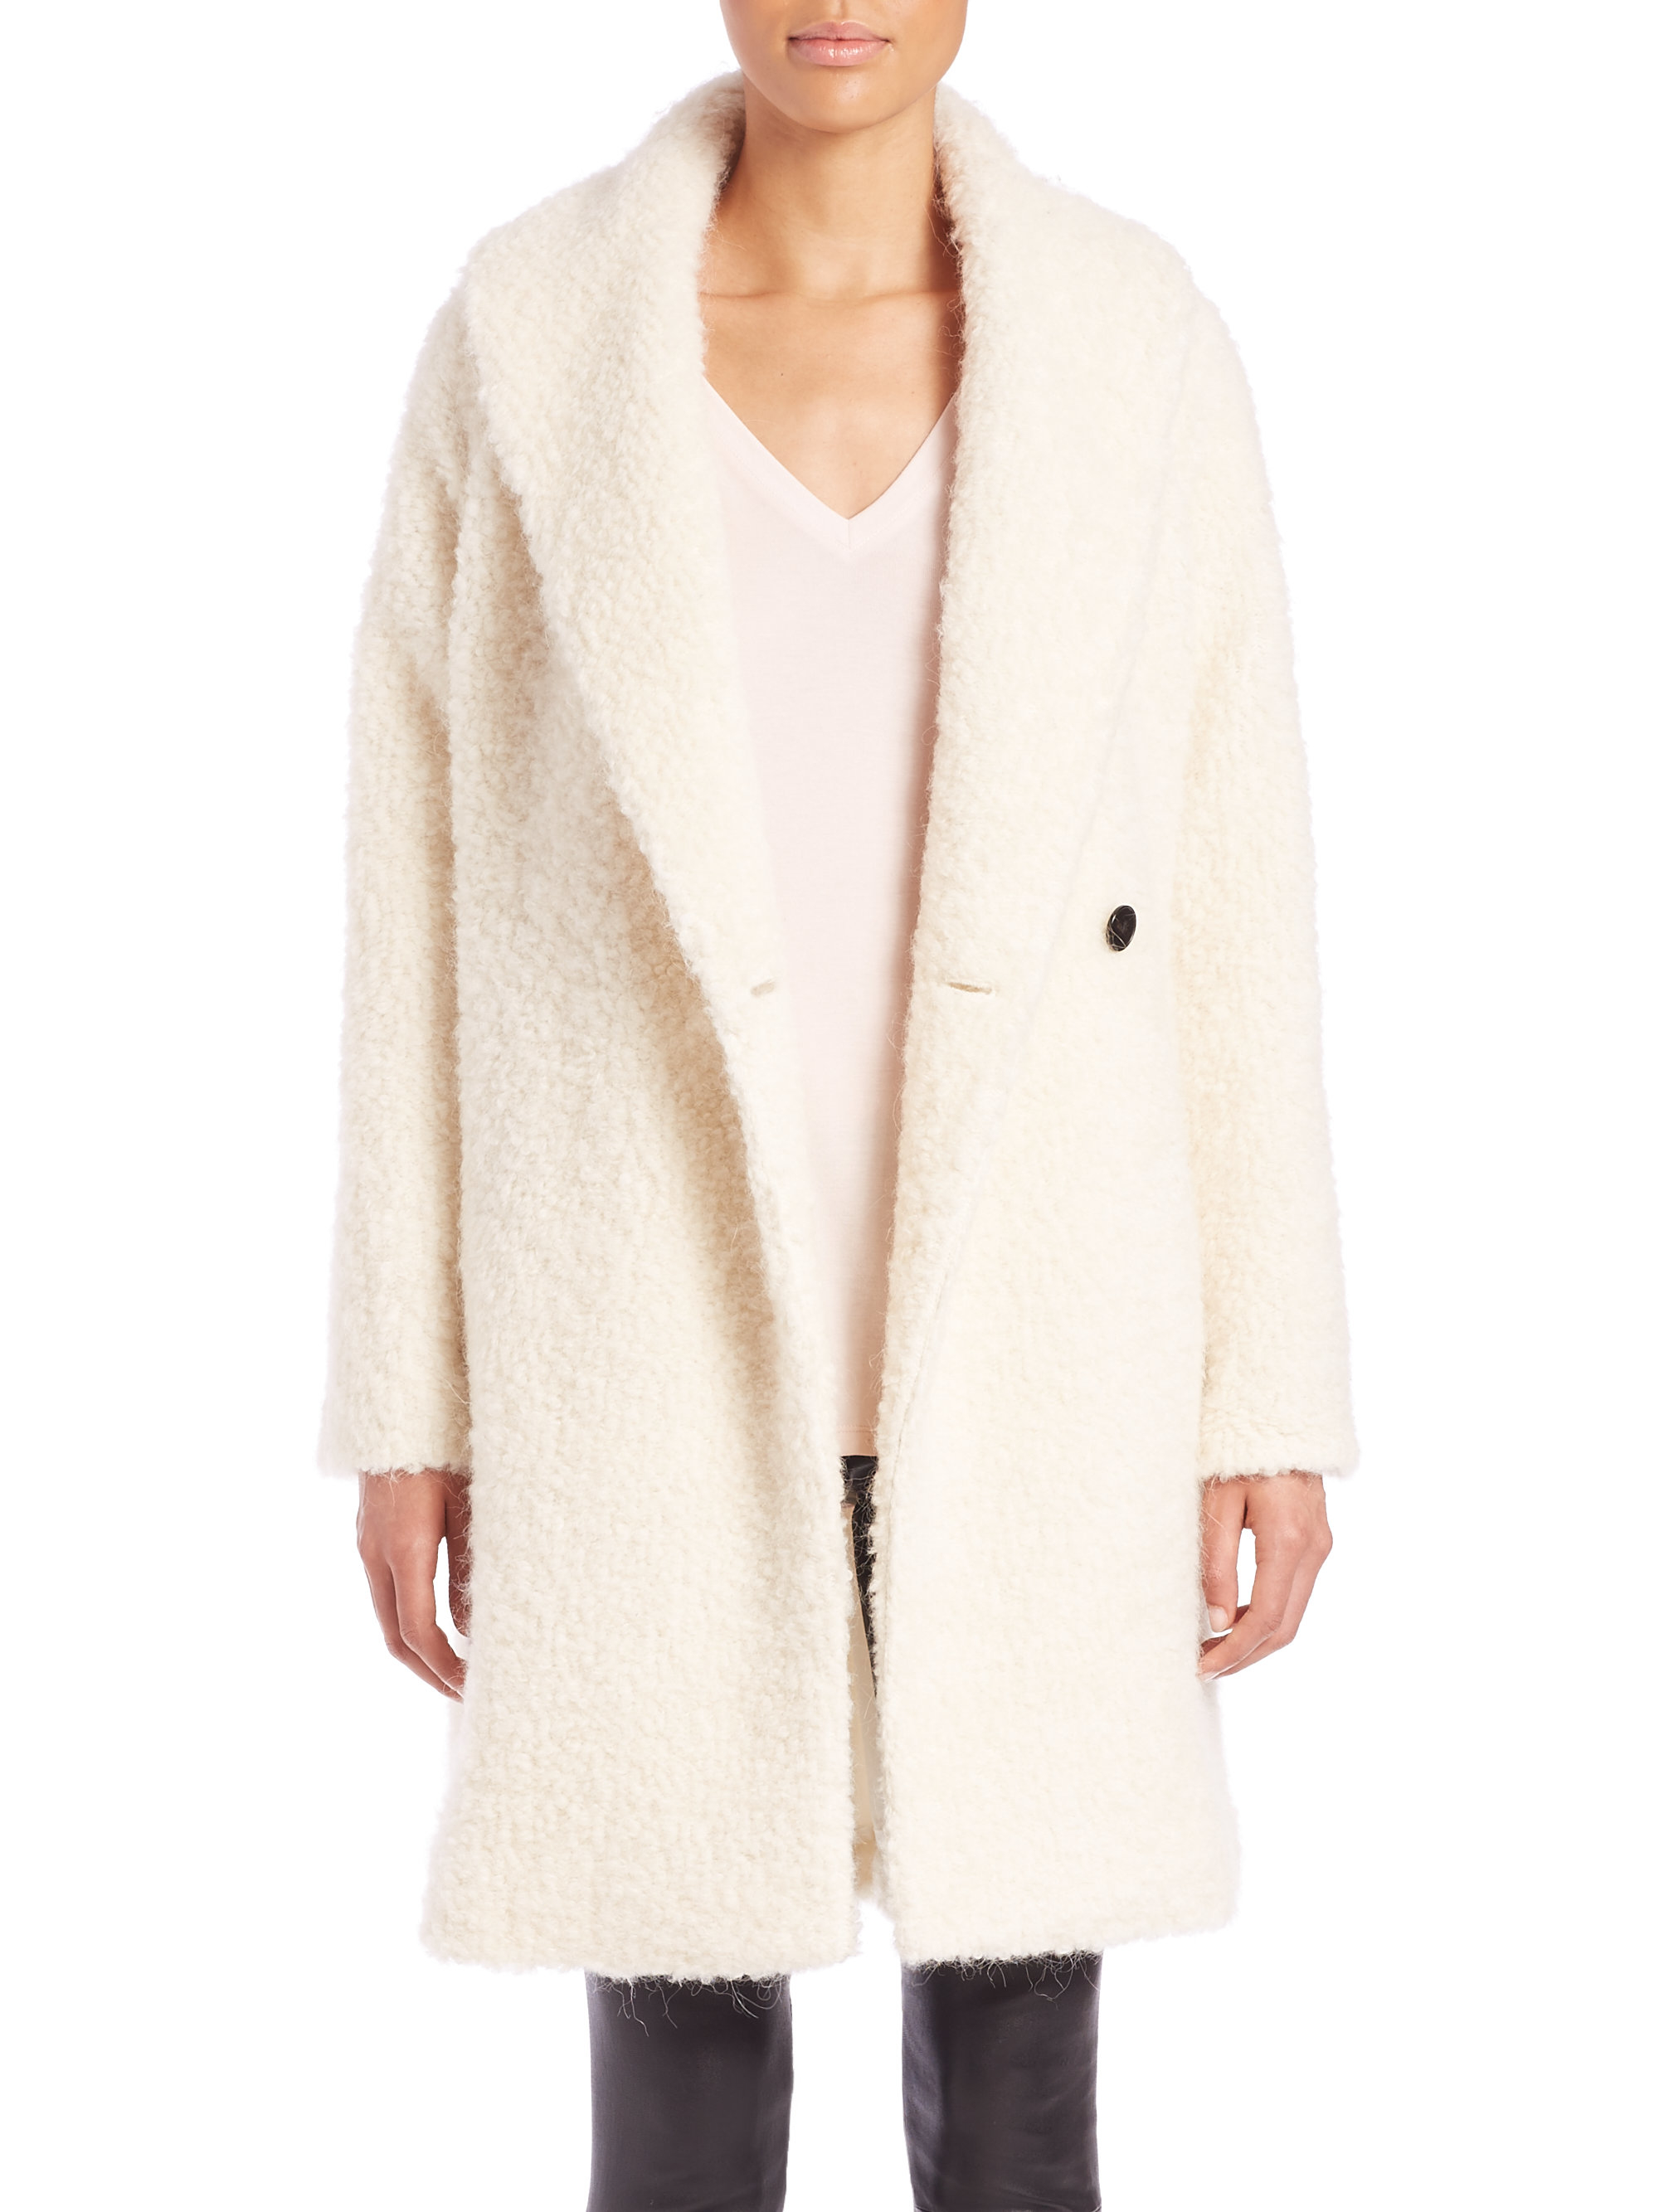 Lyst - Vince Fuzzy-knit Coat in Natural